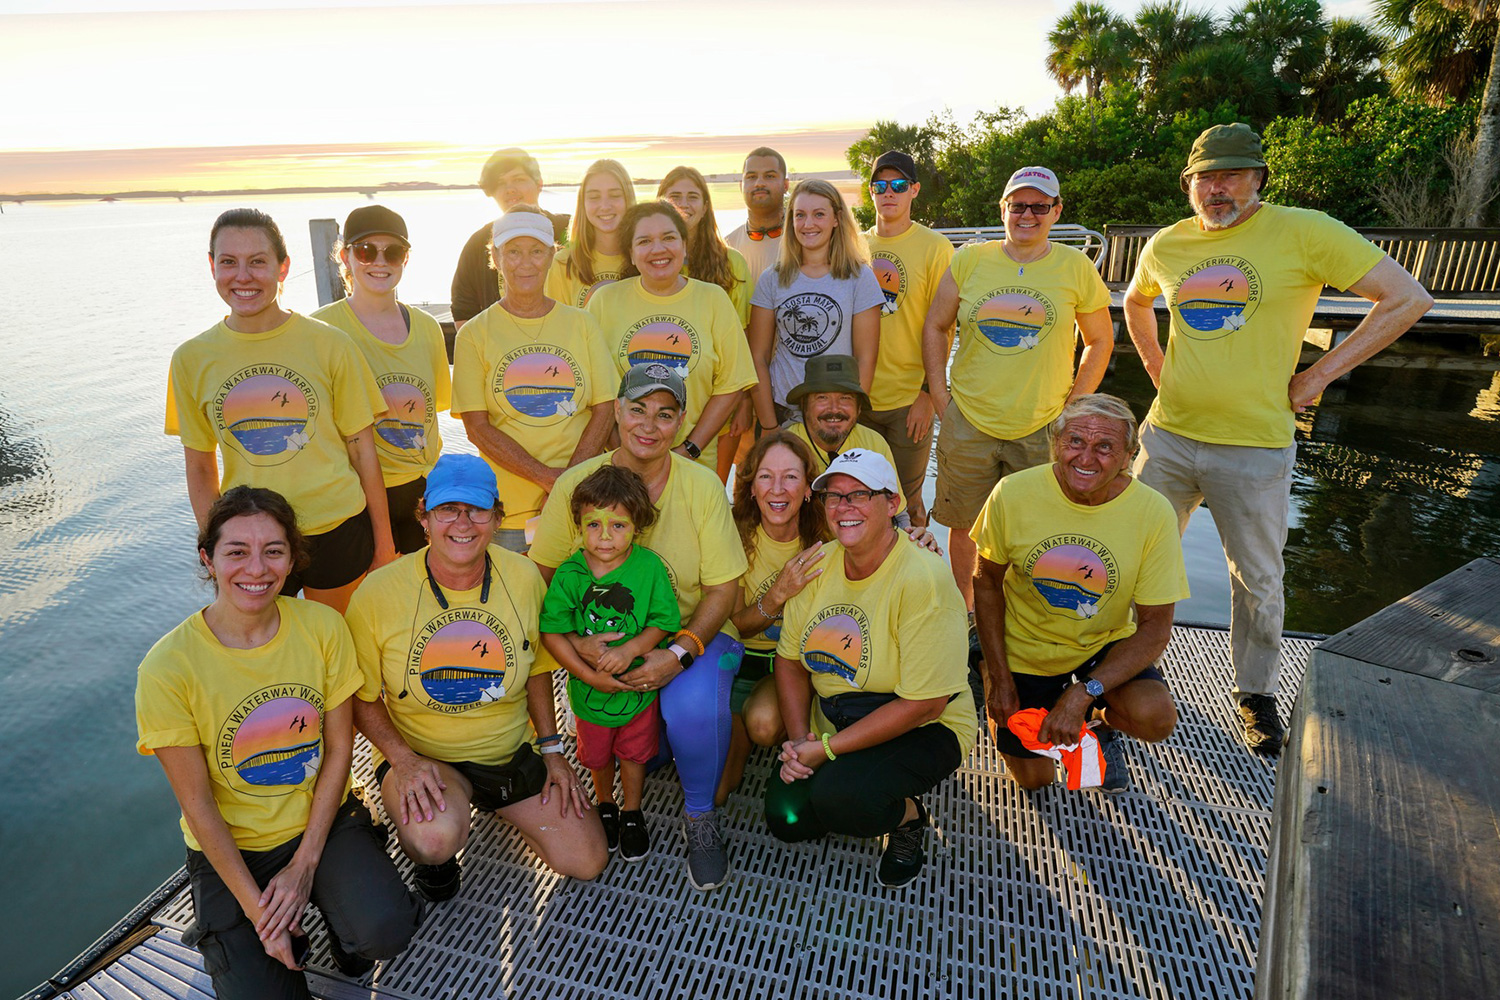 The Pineda Waterway Warriors – a nonprofit organization consisting of volunteers concerned about the health and sustainability of our waterways.